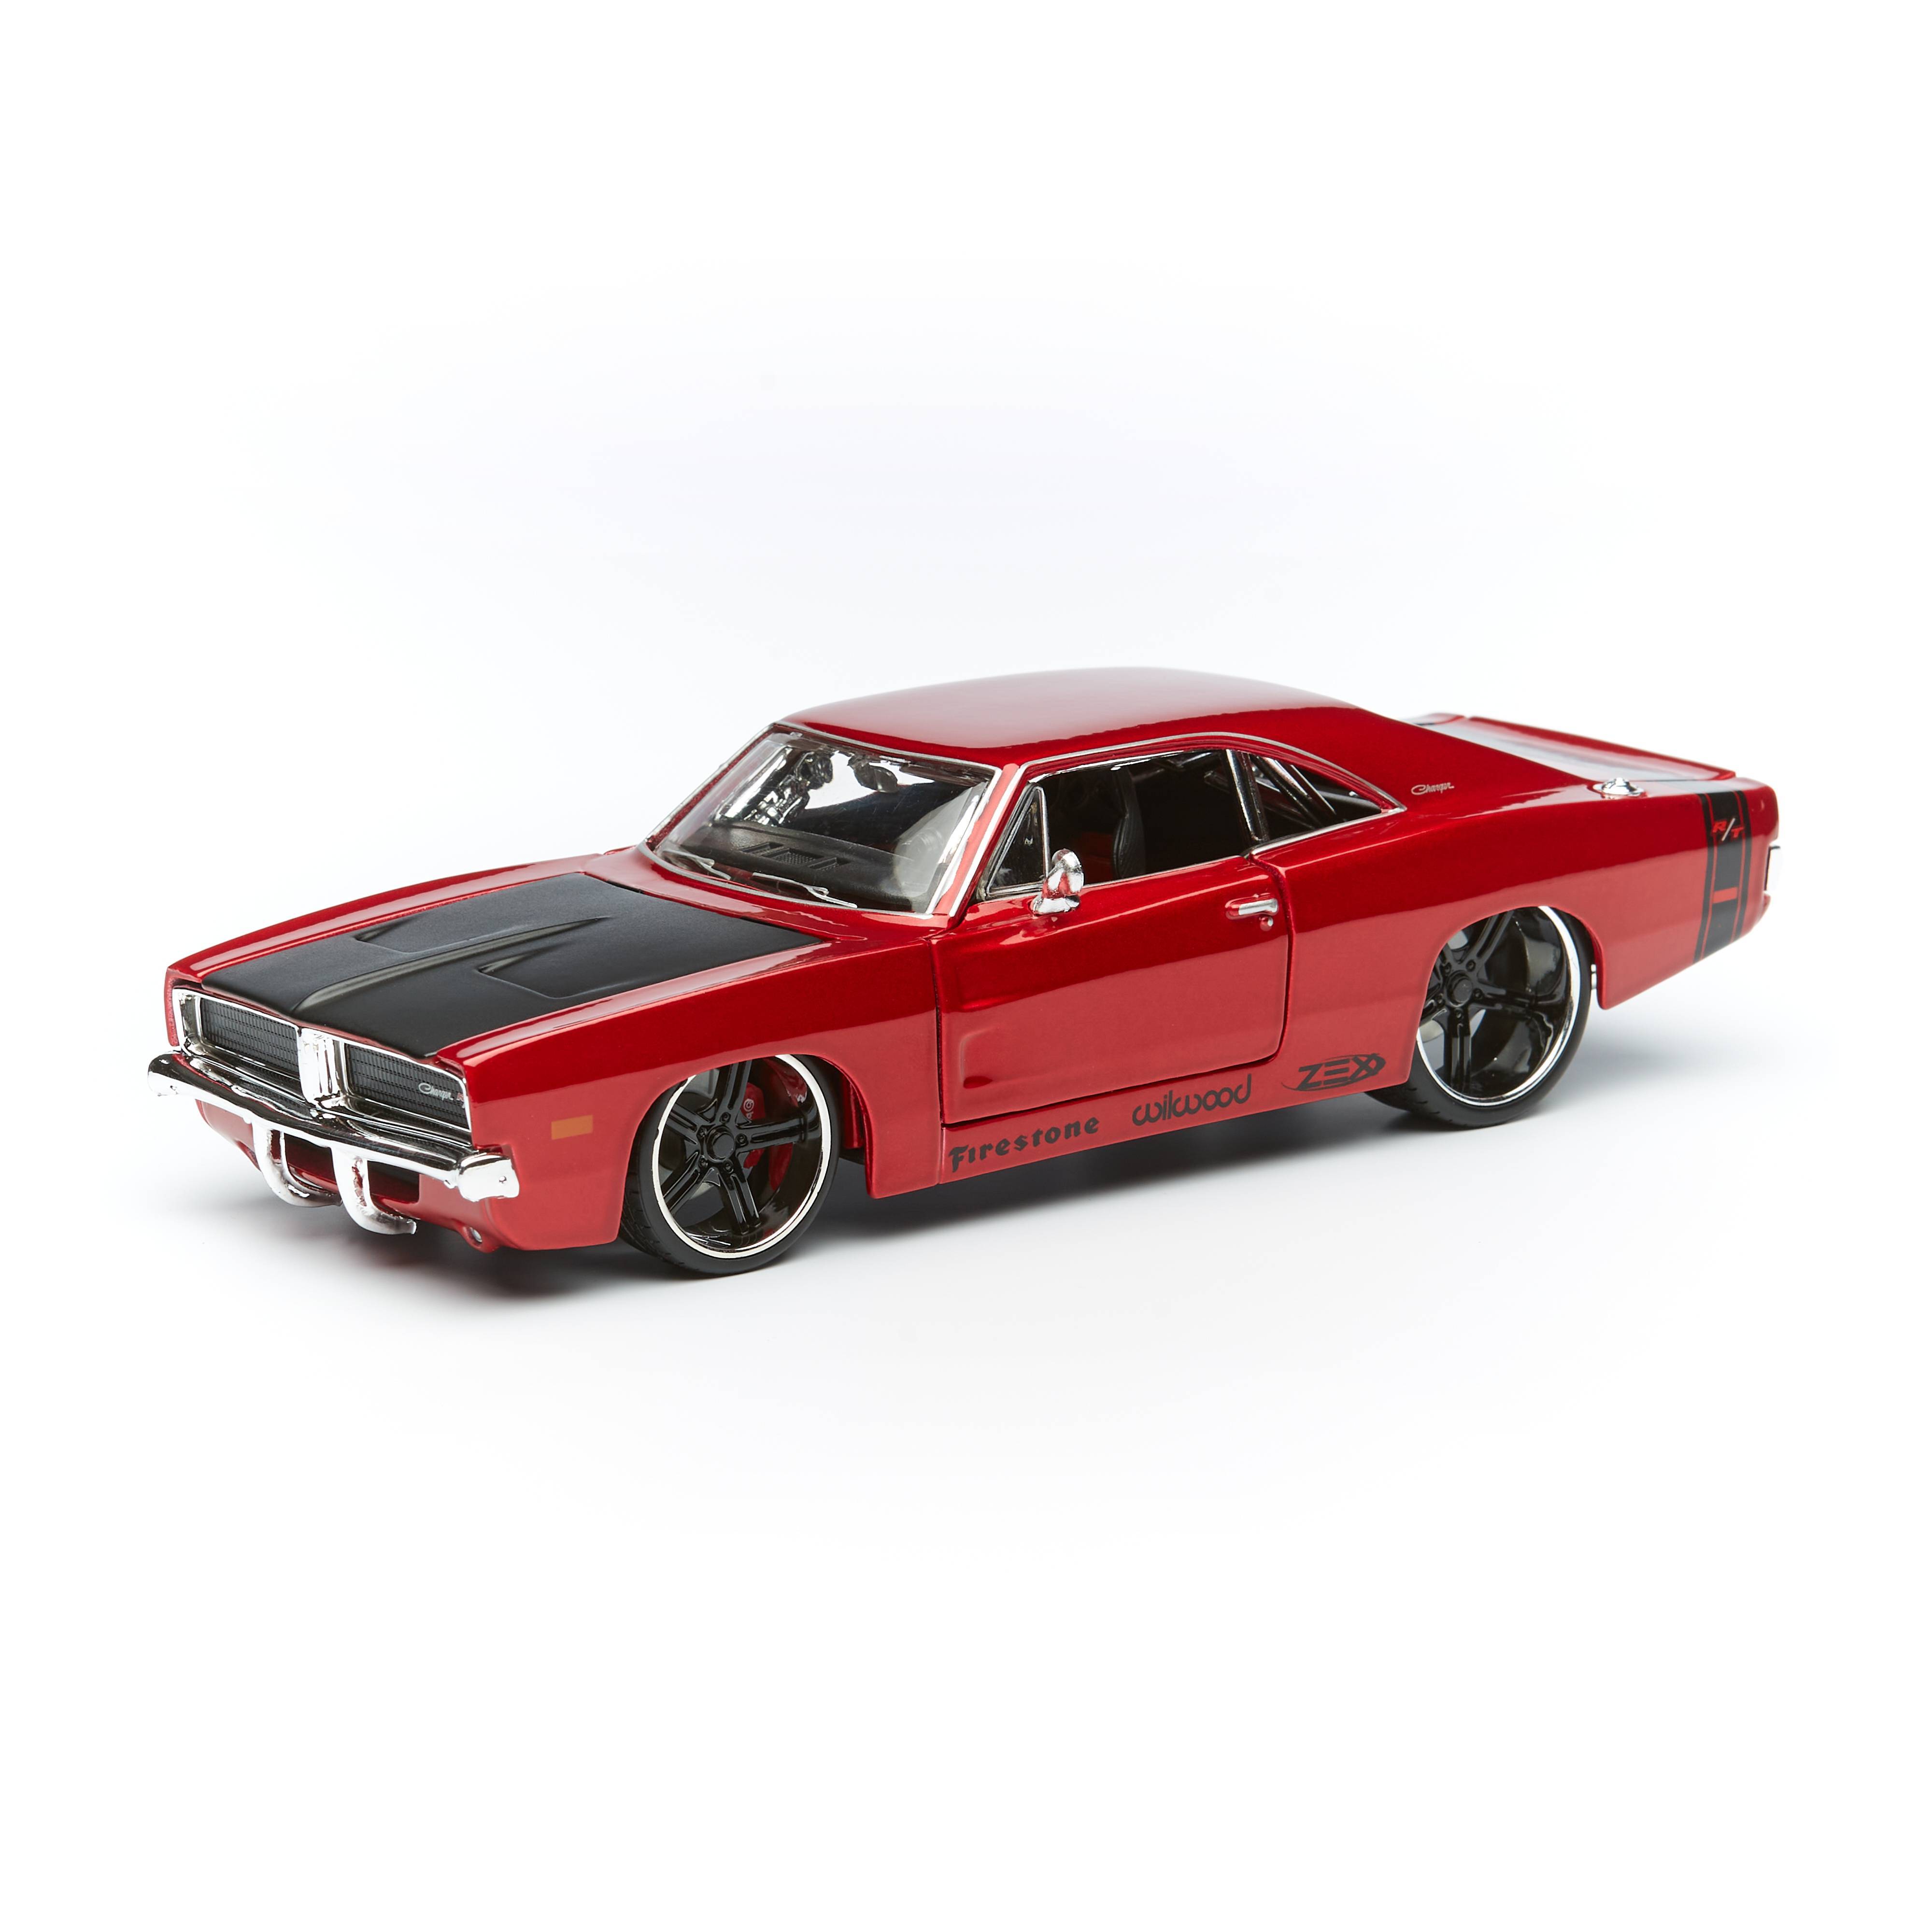 Maisto Машинка 1:25 Design Classic Muscle - 1969 Dodge Charger R/T, красная 32537